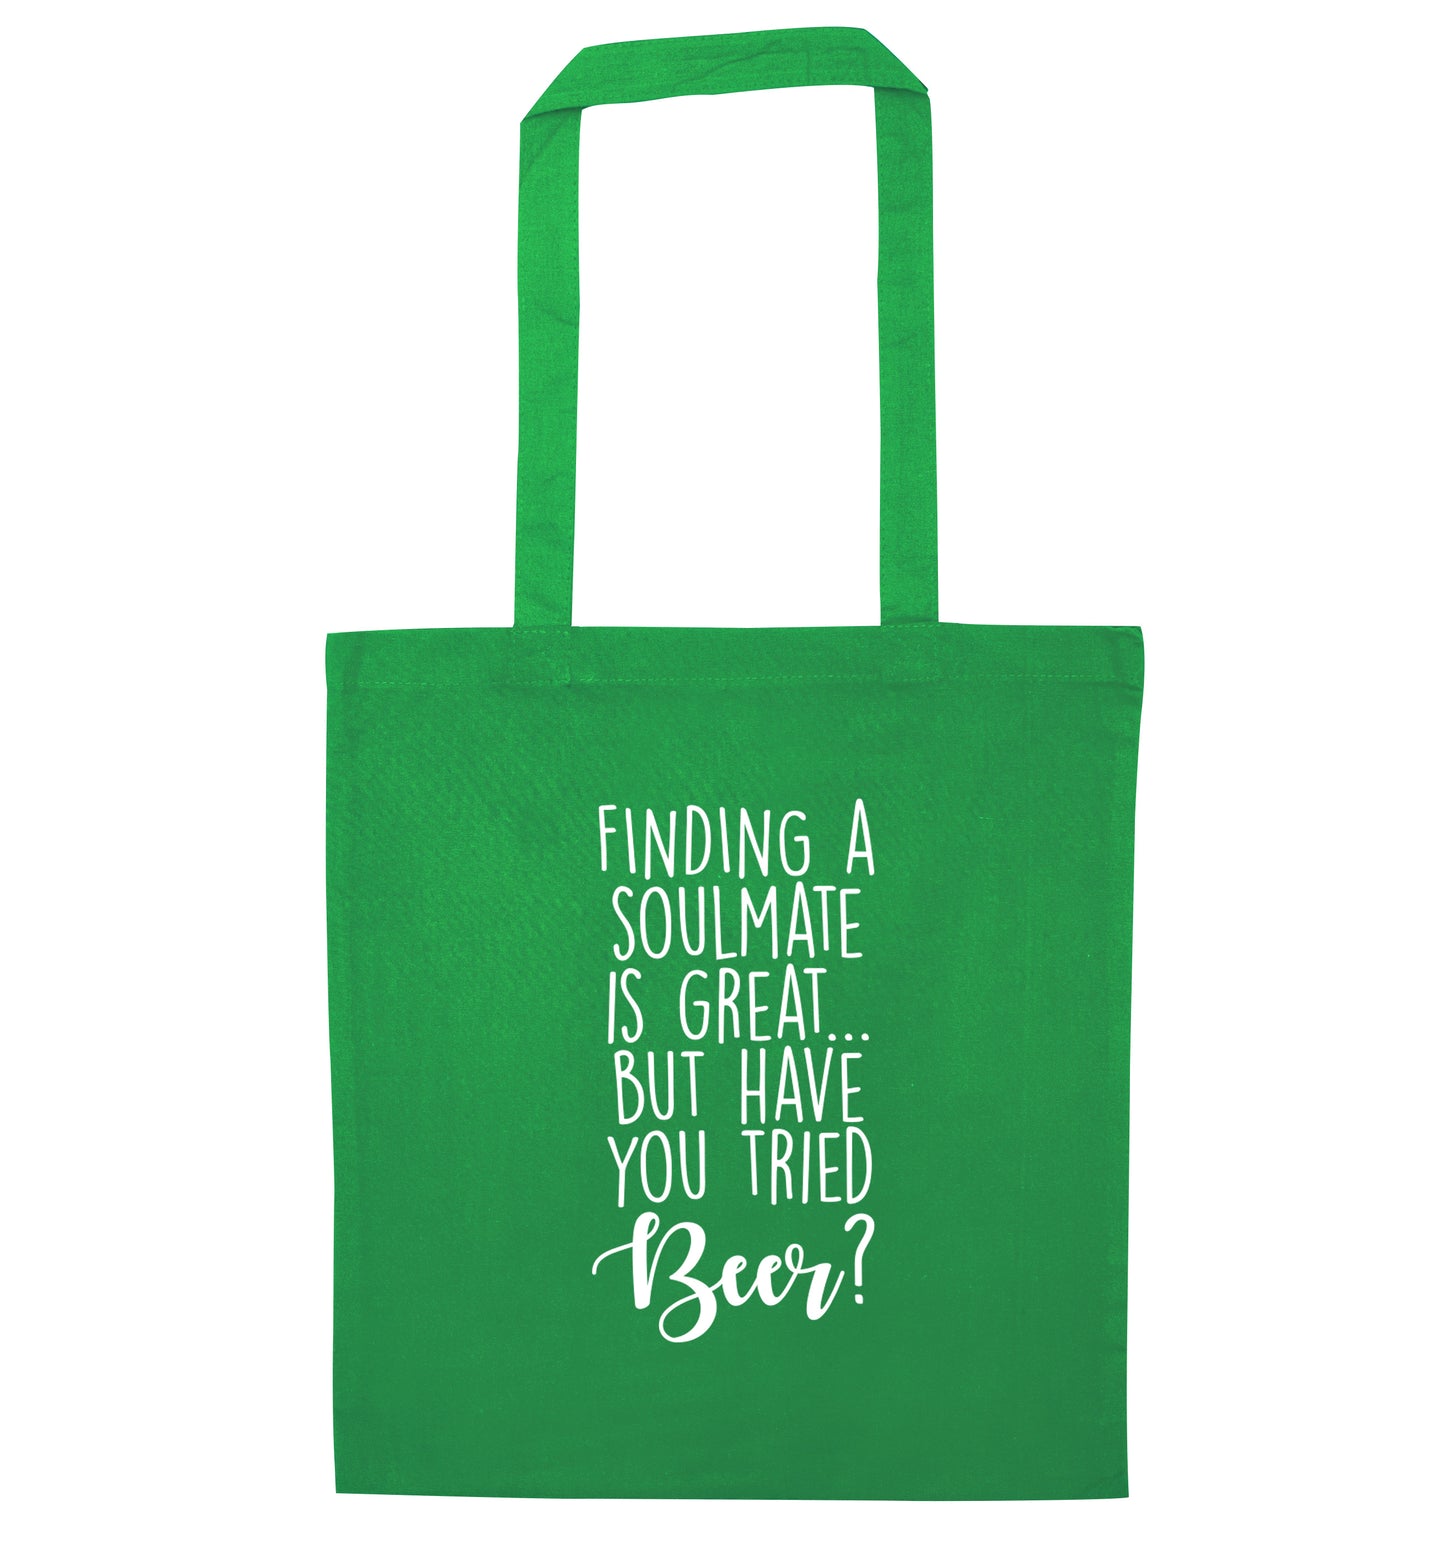 Finding a soulmate is great but have you tried beer? green tote bag